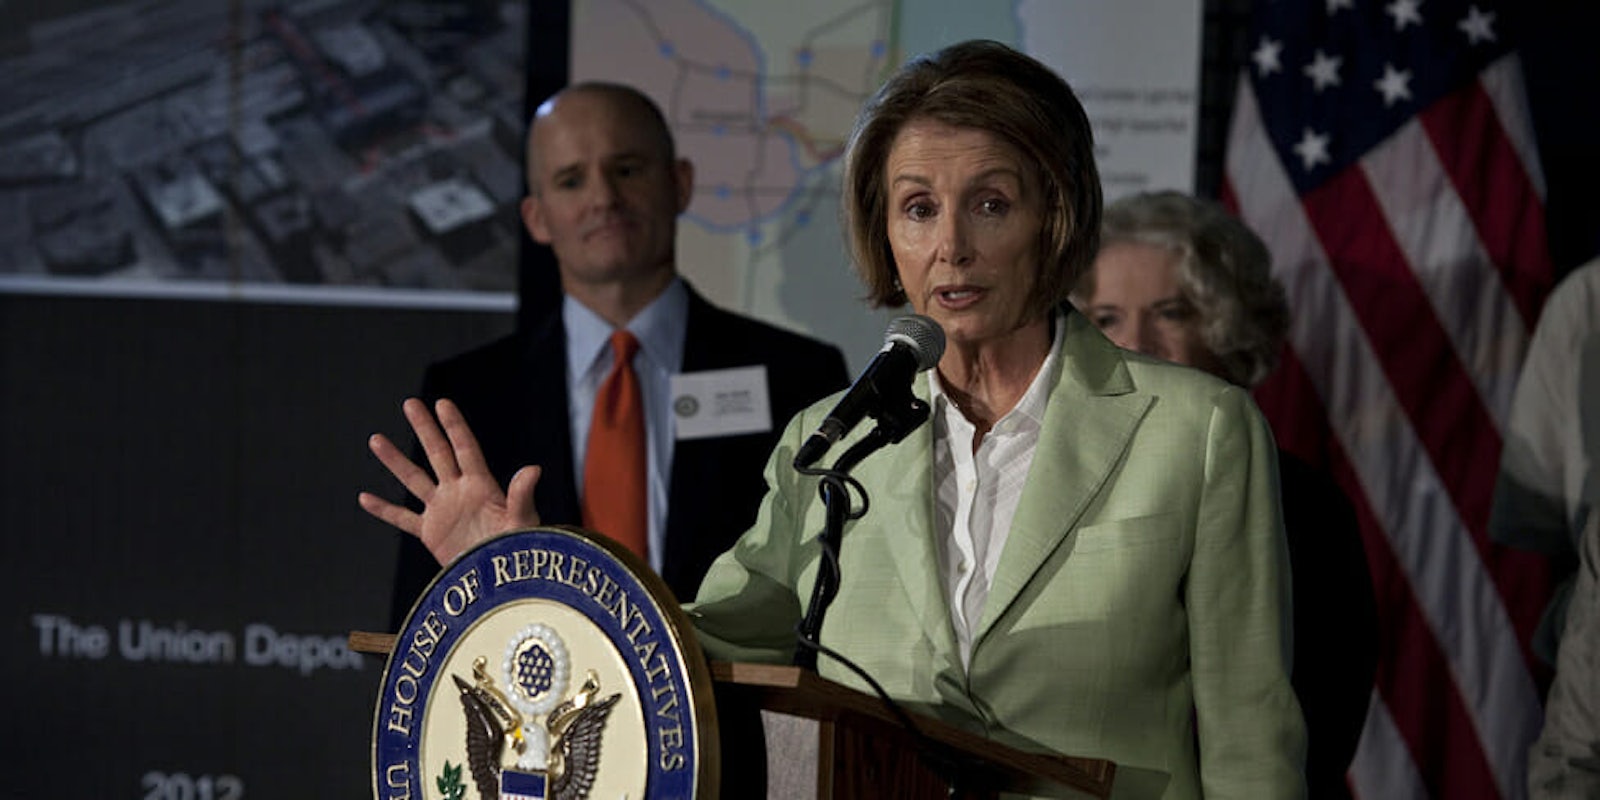 Nancy Pelosi (D-Calif.) spoke for more than six hours on Wednesday night, lending her support for so-called 'dreamers,' or young undocumented immigrants.